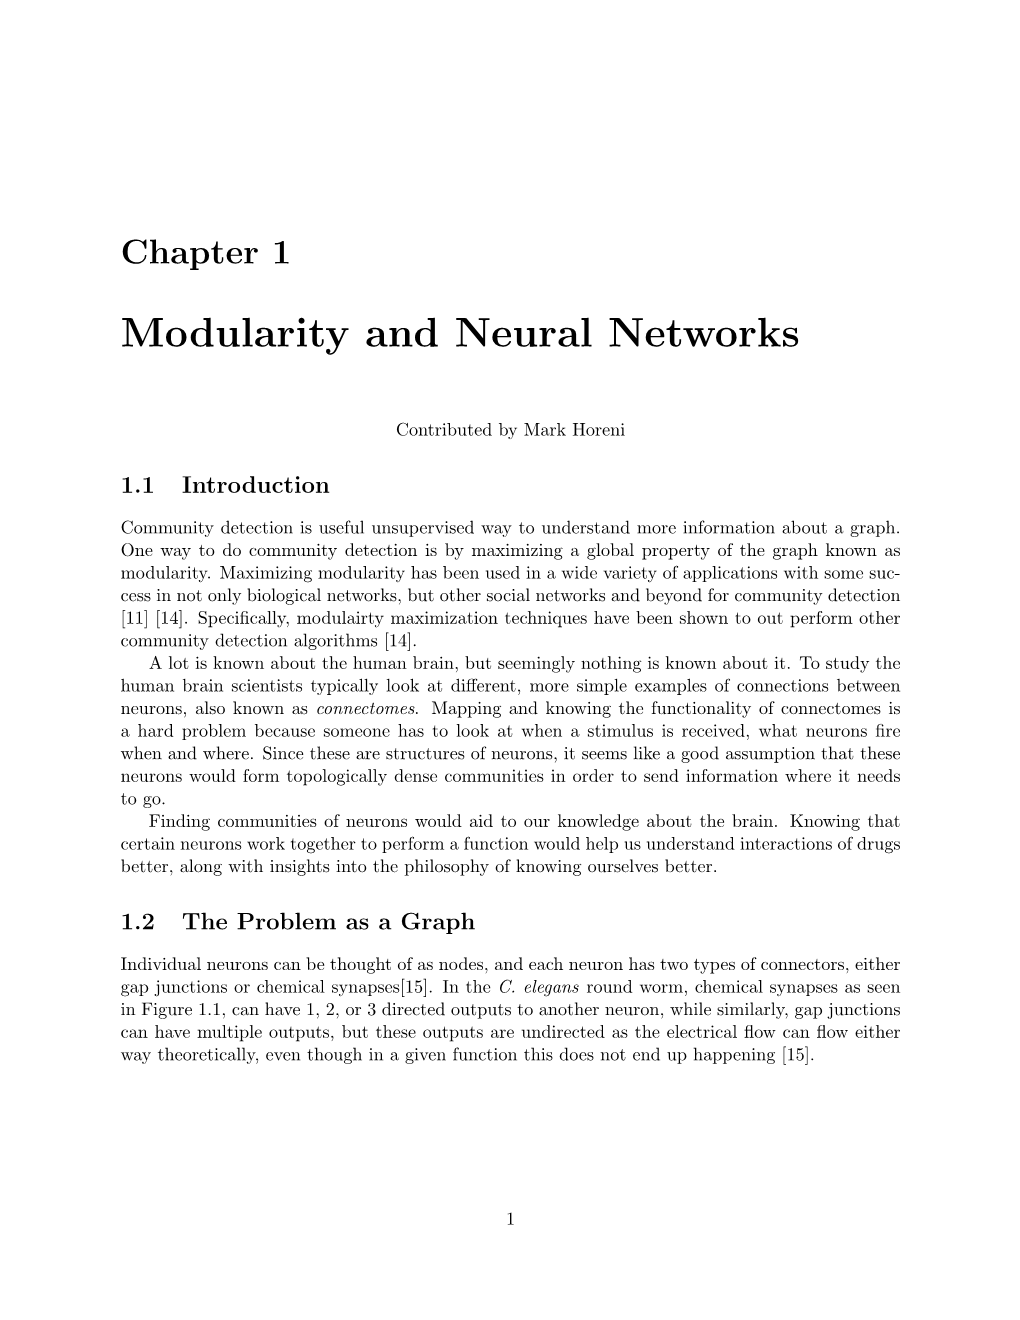 Modularity and Neural Networks